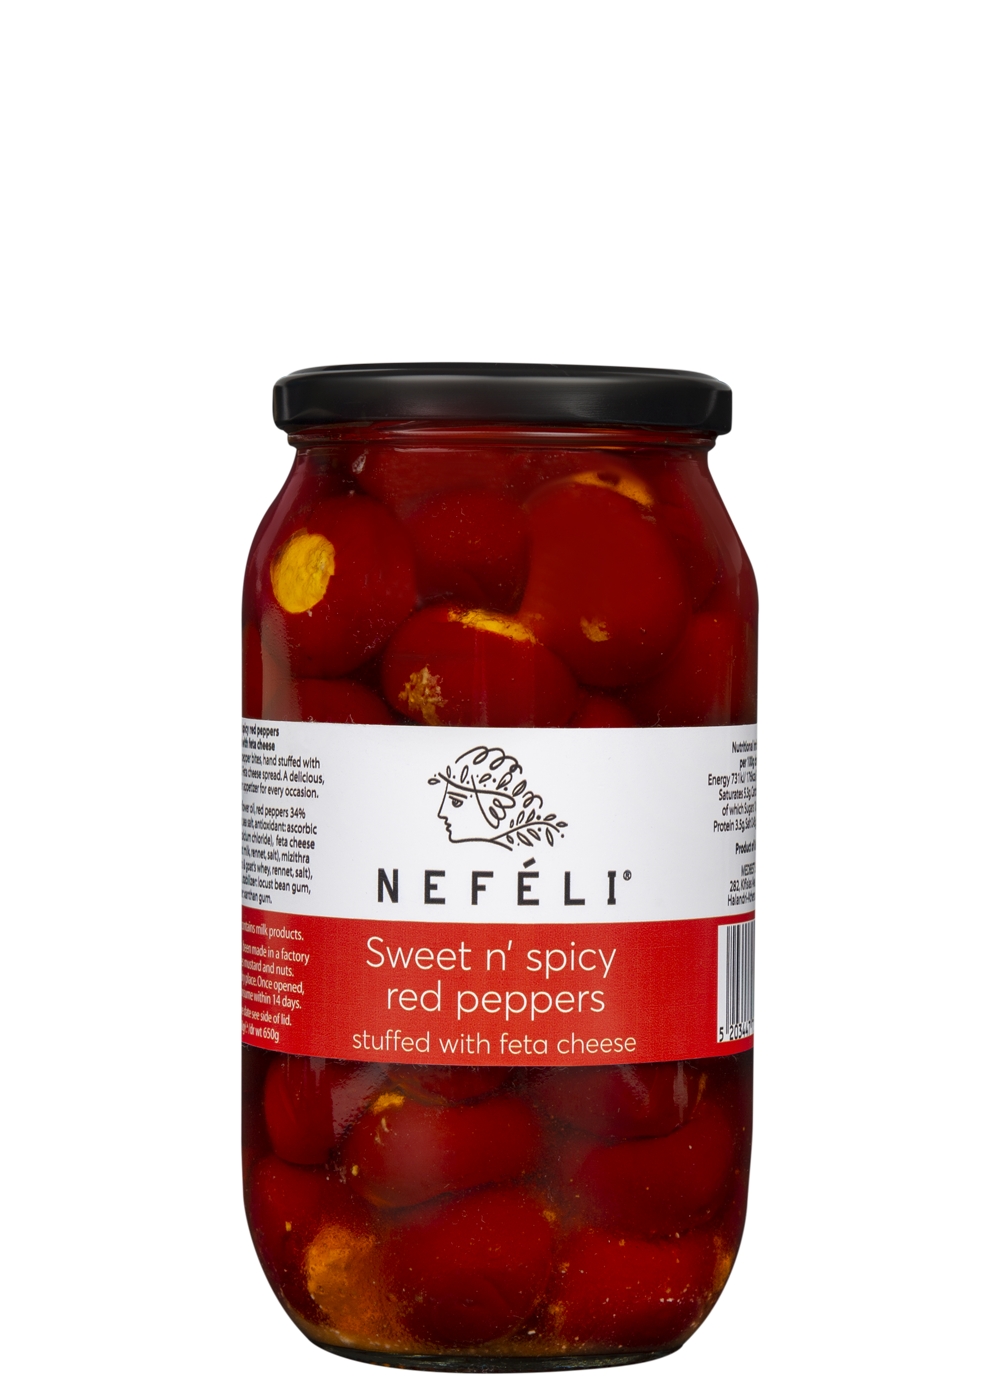 Sweet and spicy red peppers stuffed with feta PDO cheese in 1lt glass jar